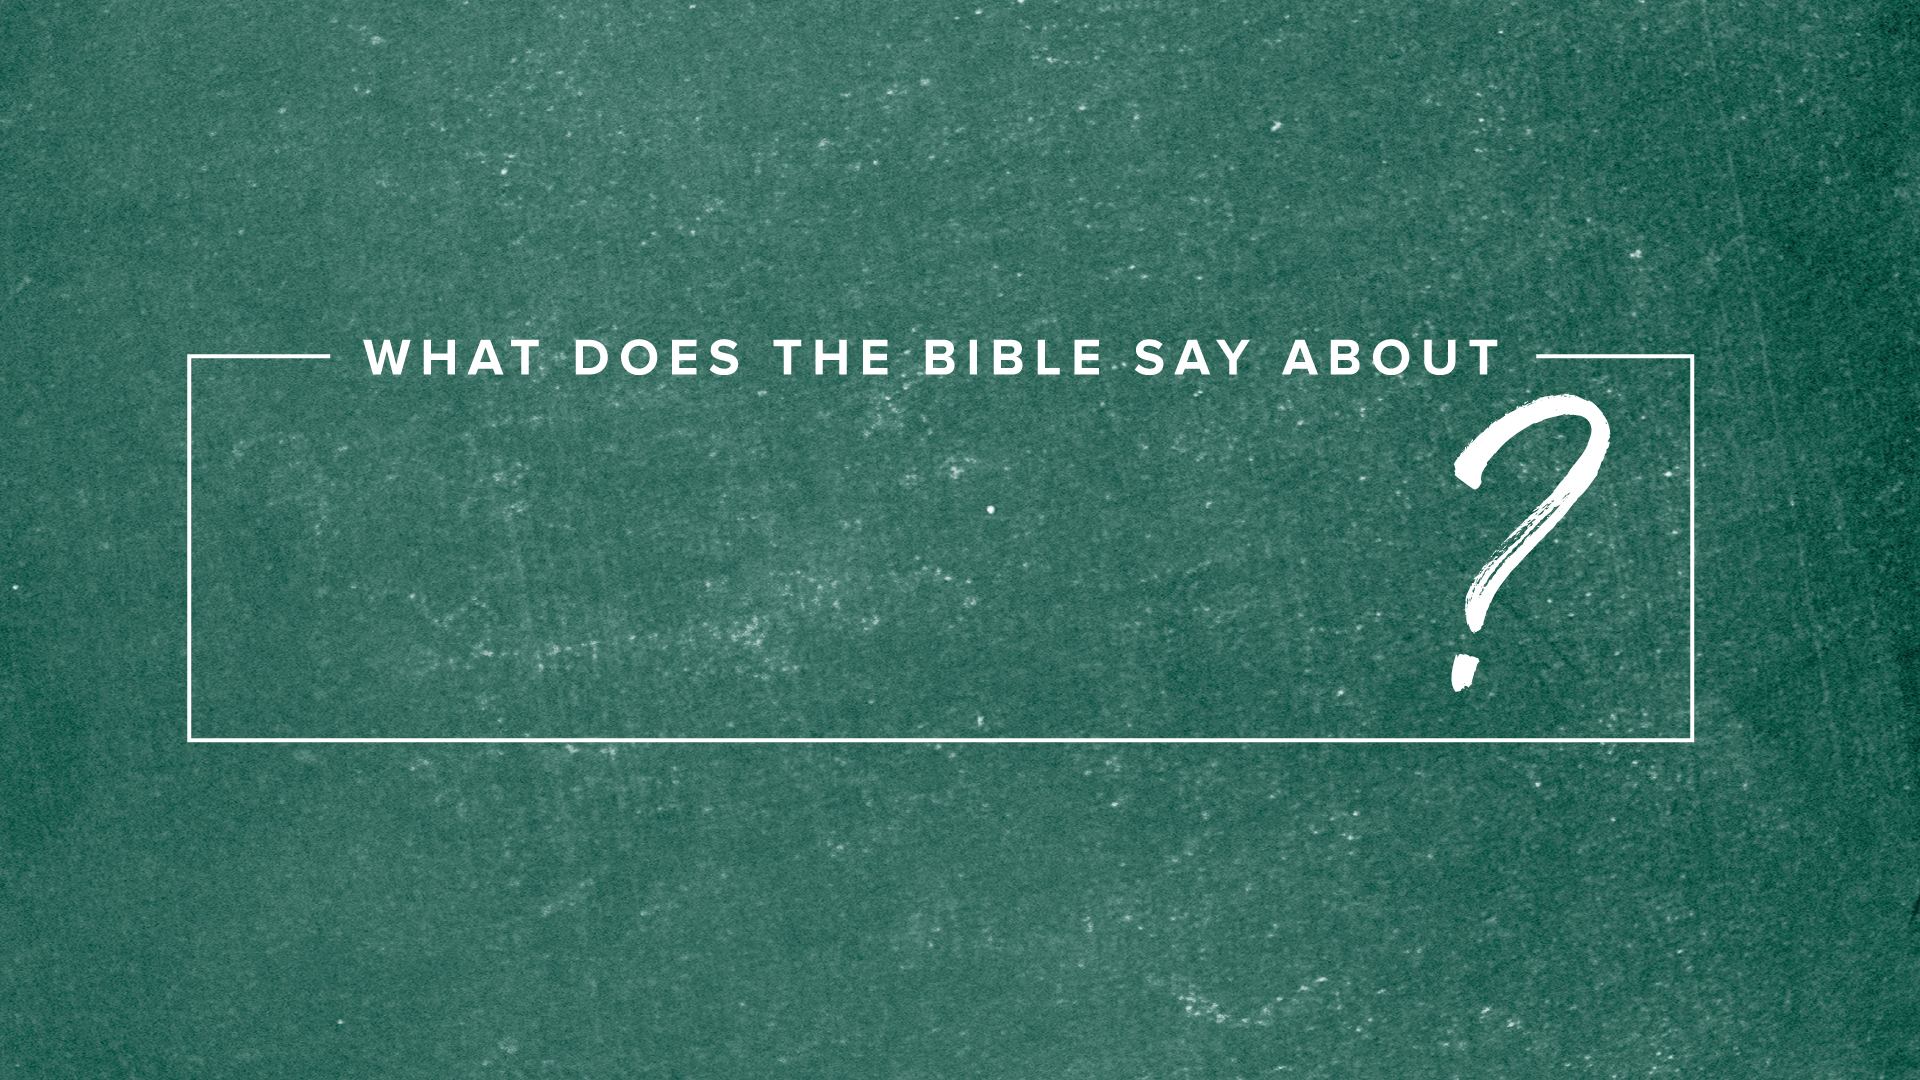 What Does The Bible Say About ___? Racism